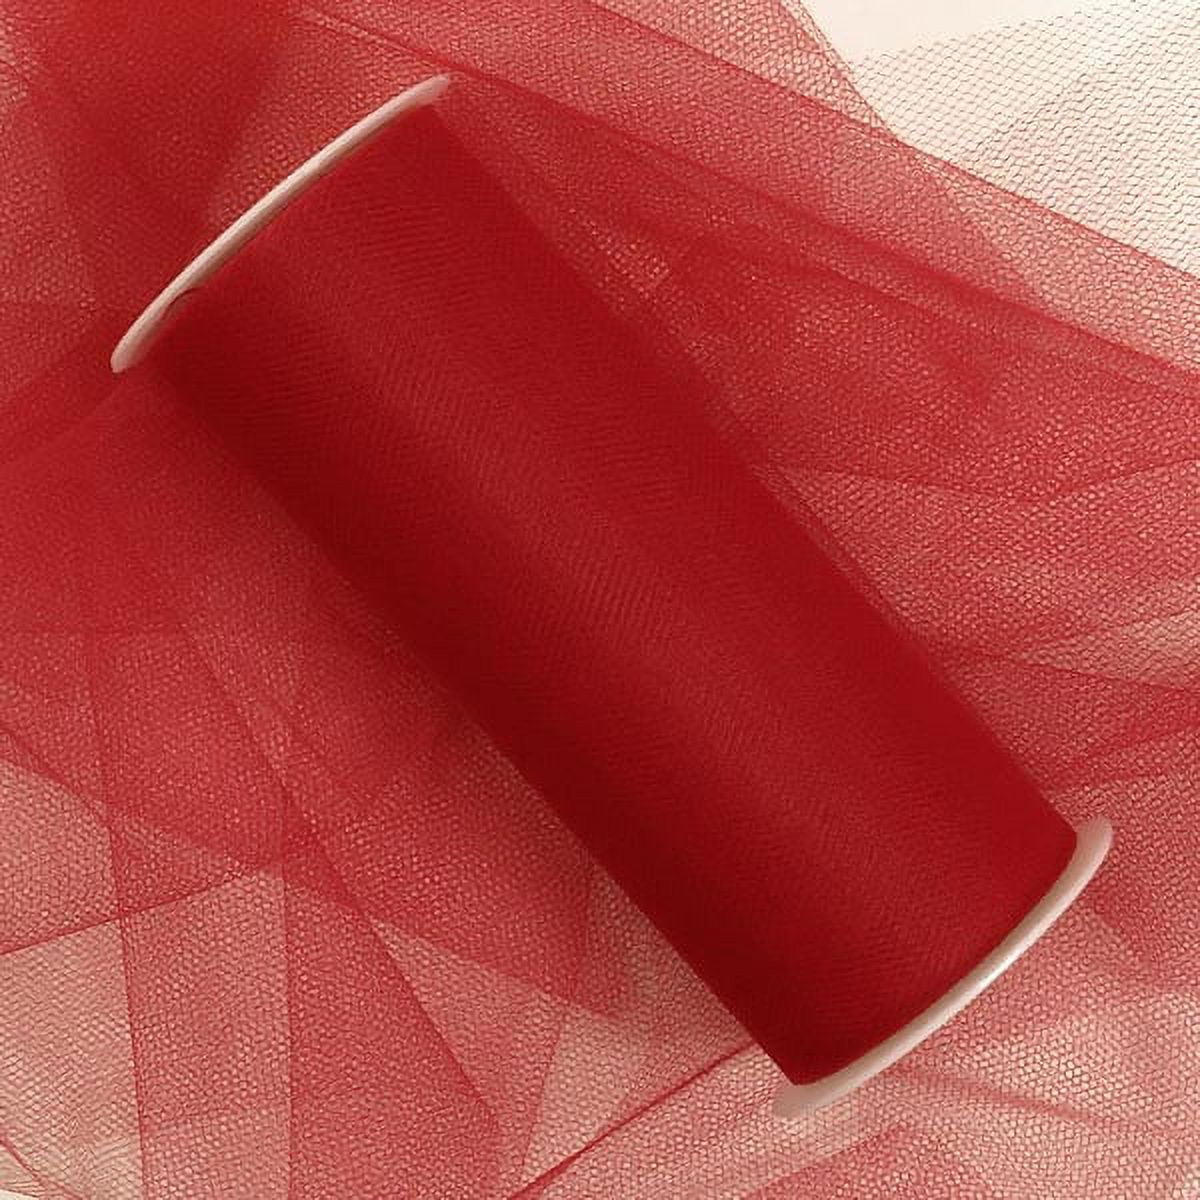 Shop Large Tulle Rolls (Red)  Luna Wedding & Event Supplies